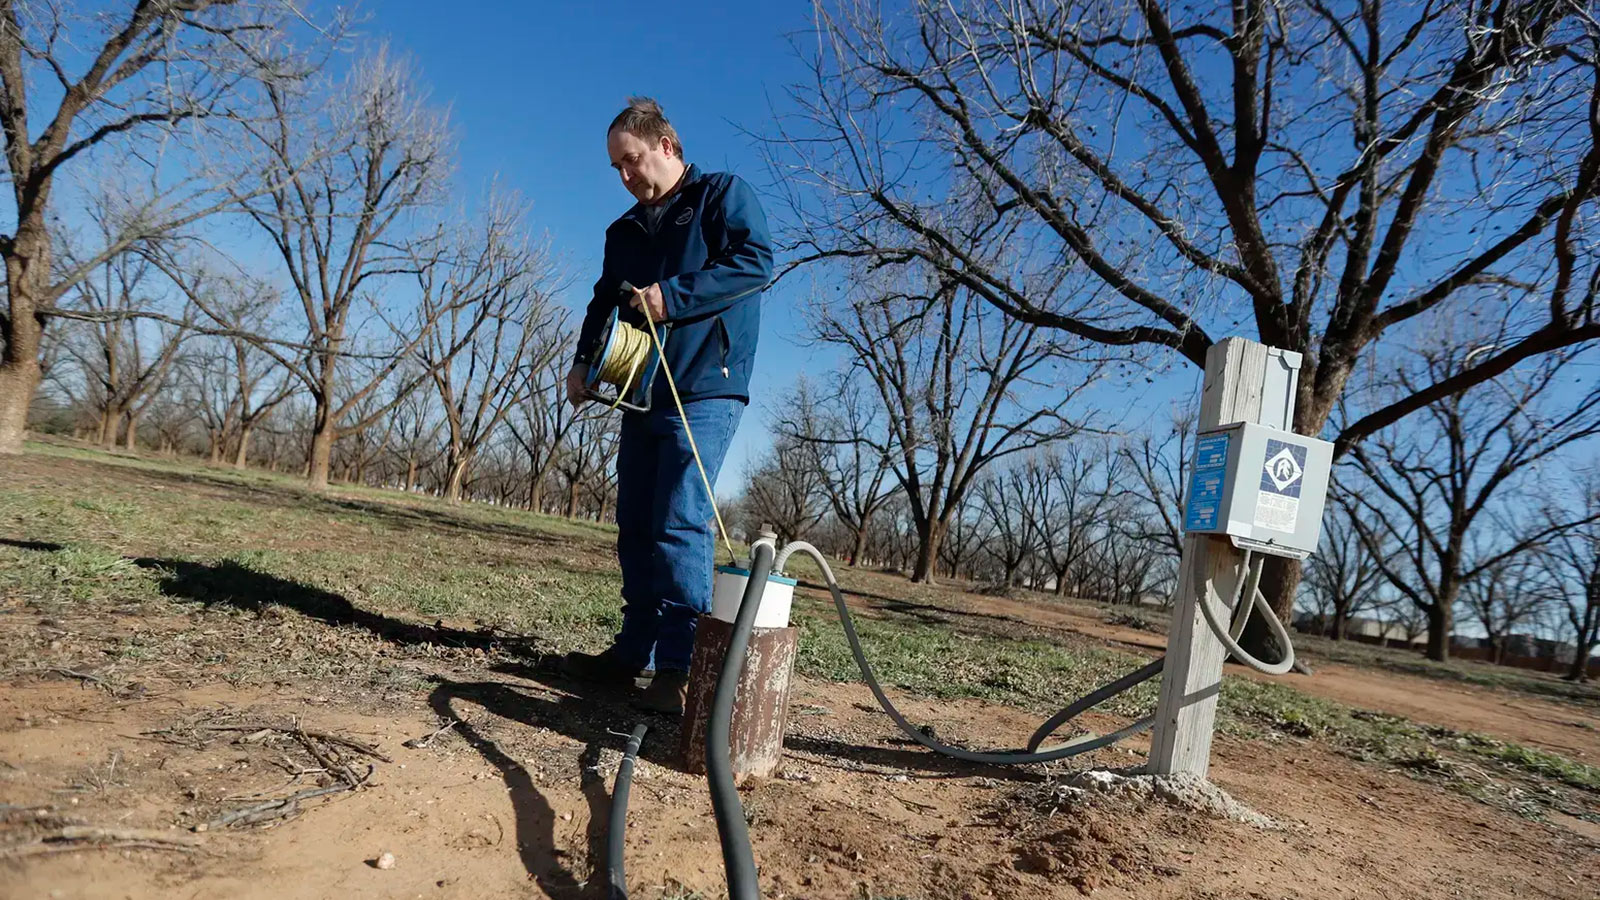 A man unrolls a rope attached to a metal cylinder in the ground.